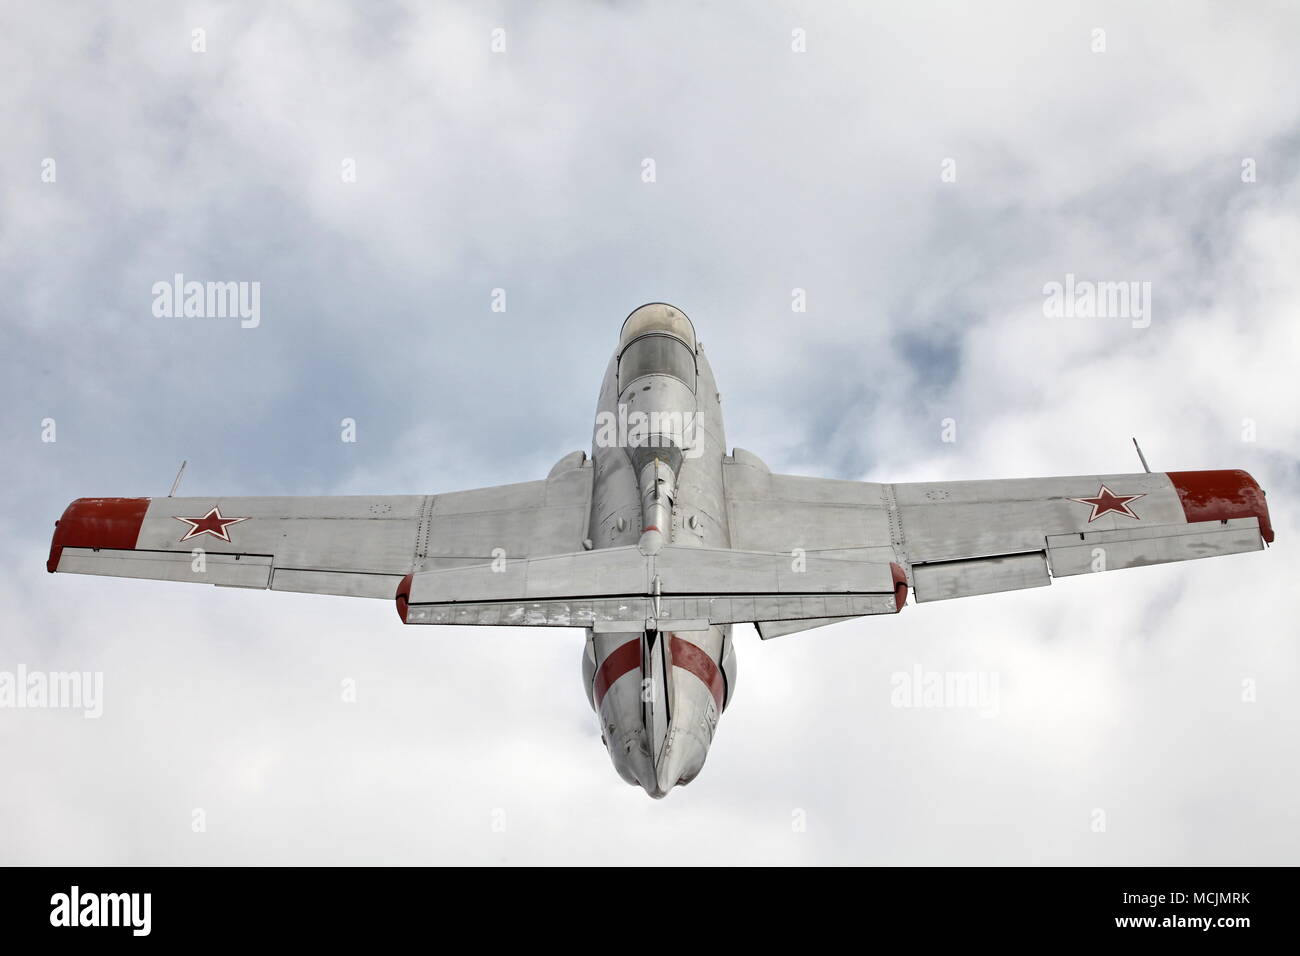 Czechoslovak training  jet  aircraft Aero L-29 Delfin rear view from above Stock Photo